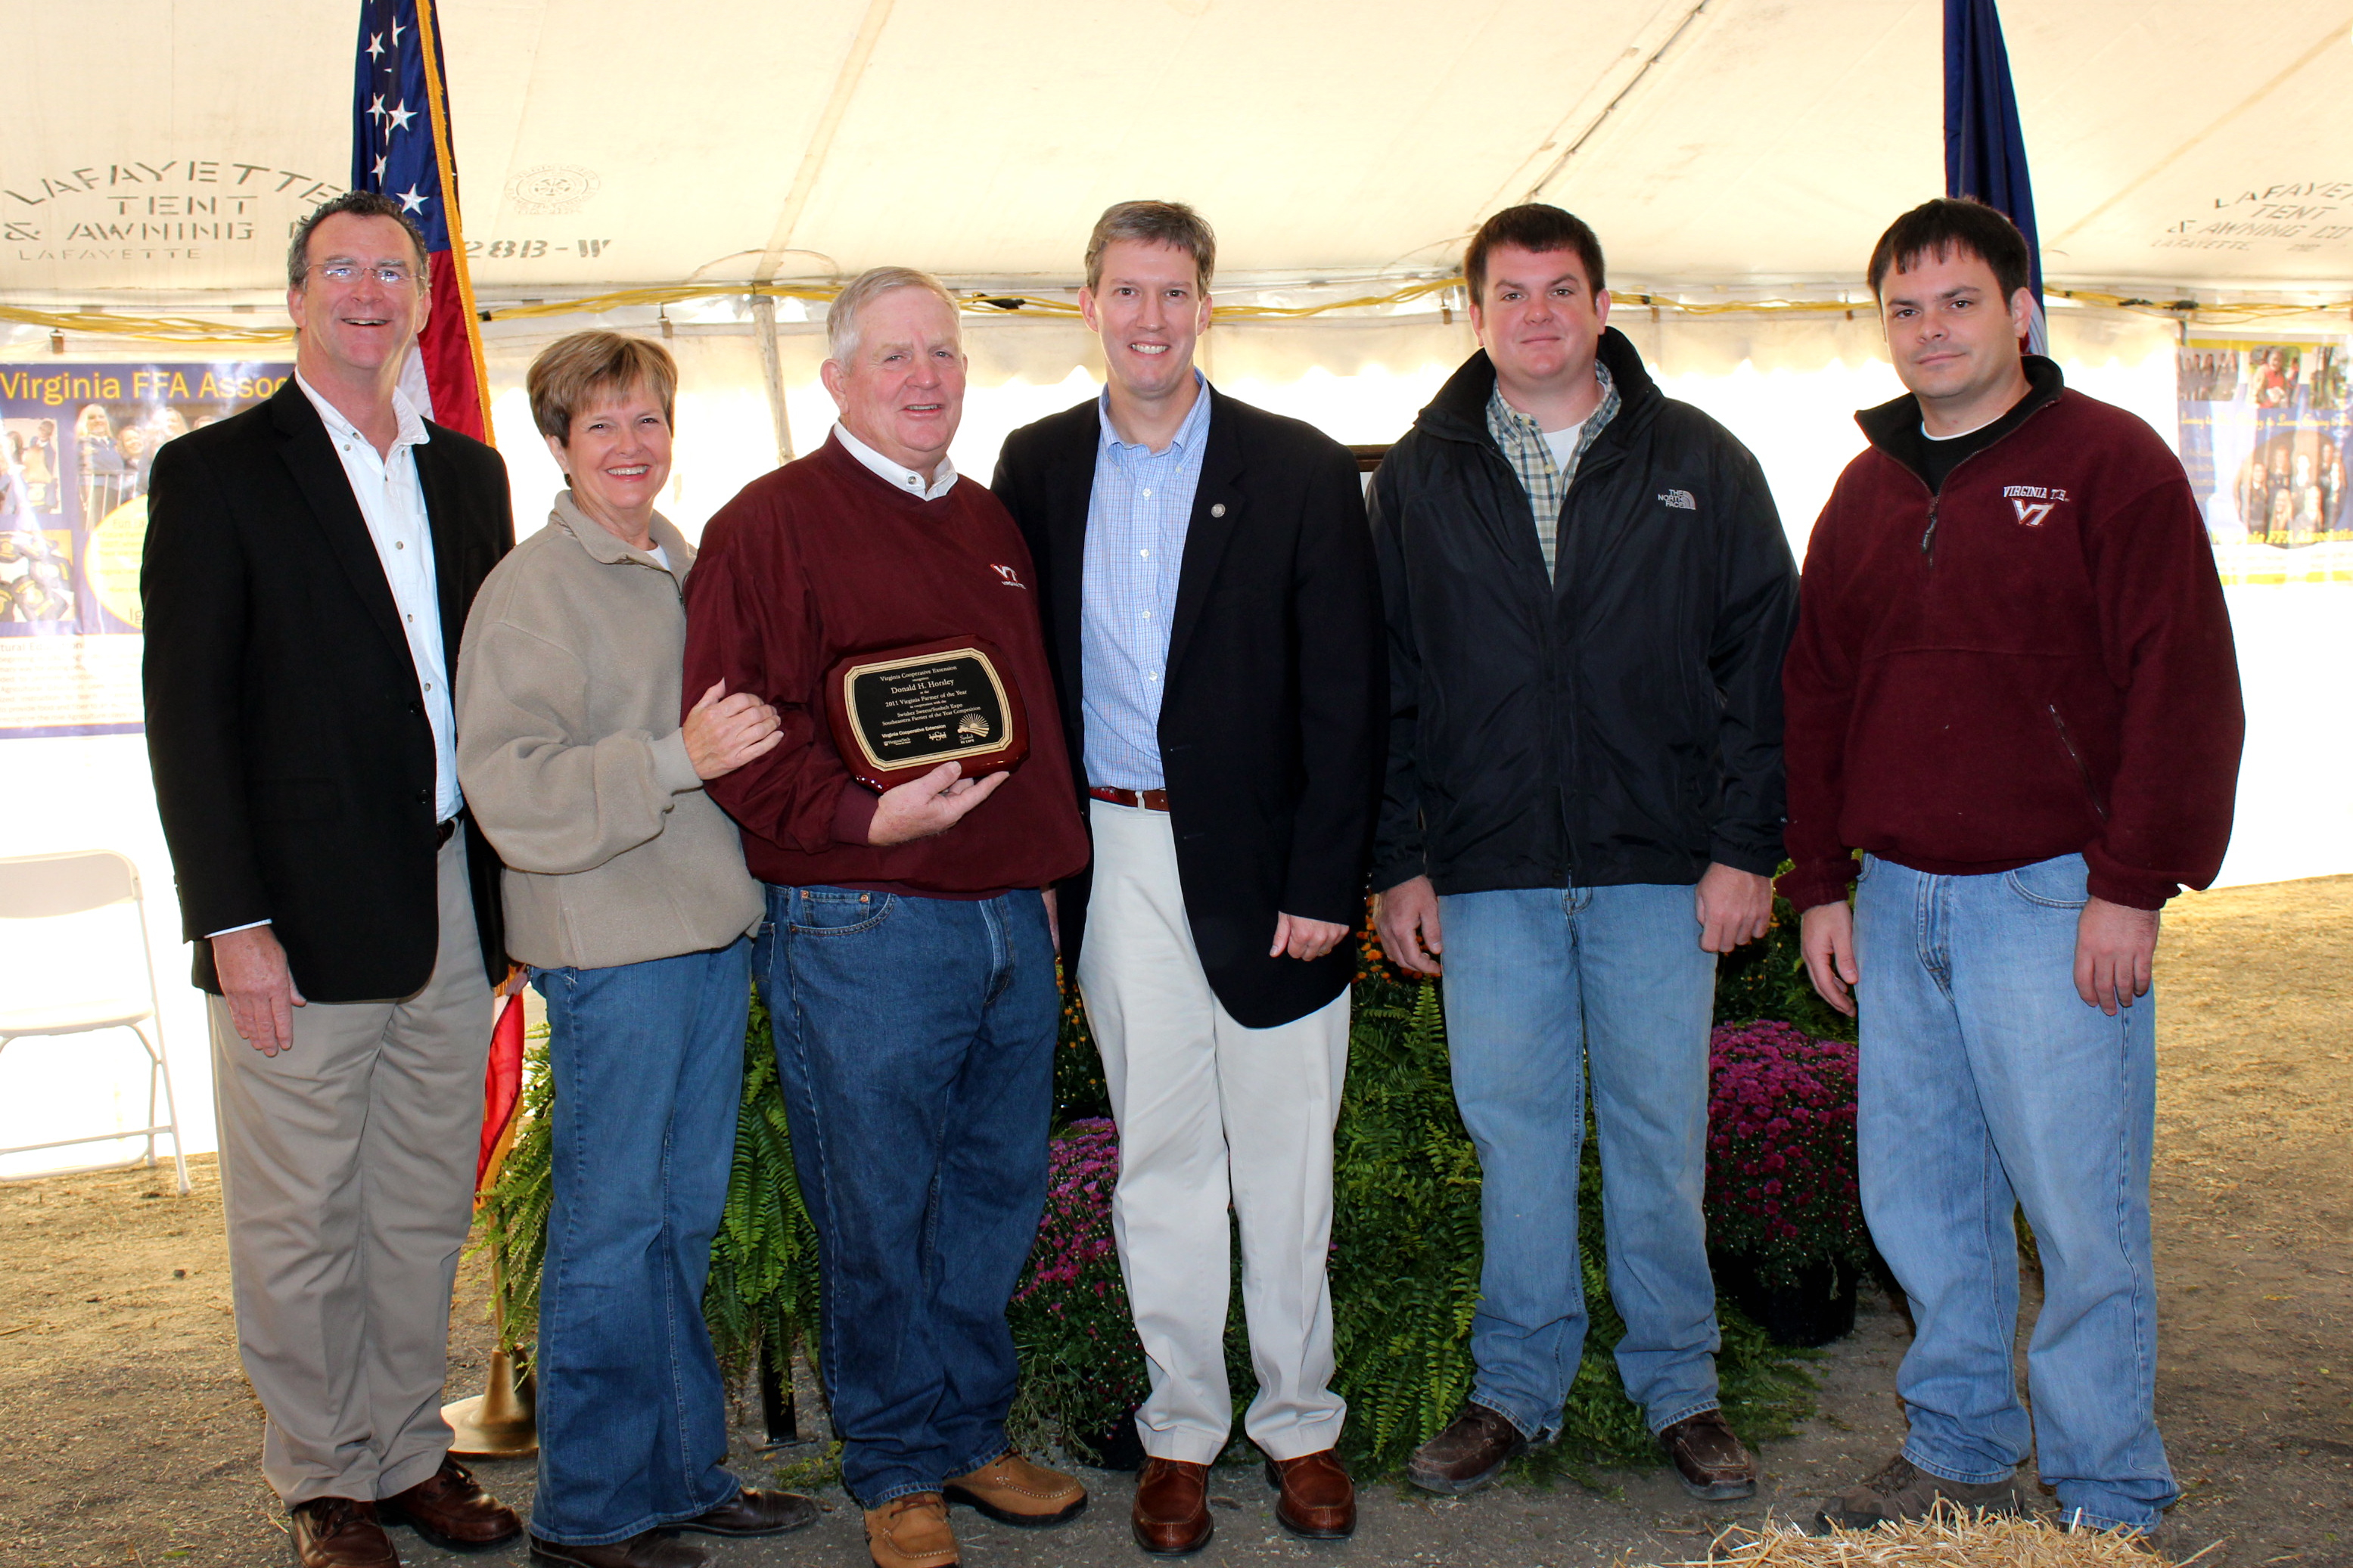 Farmer of the Year presetnation at the State Fair of Virginia